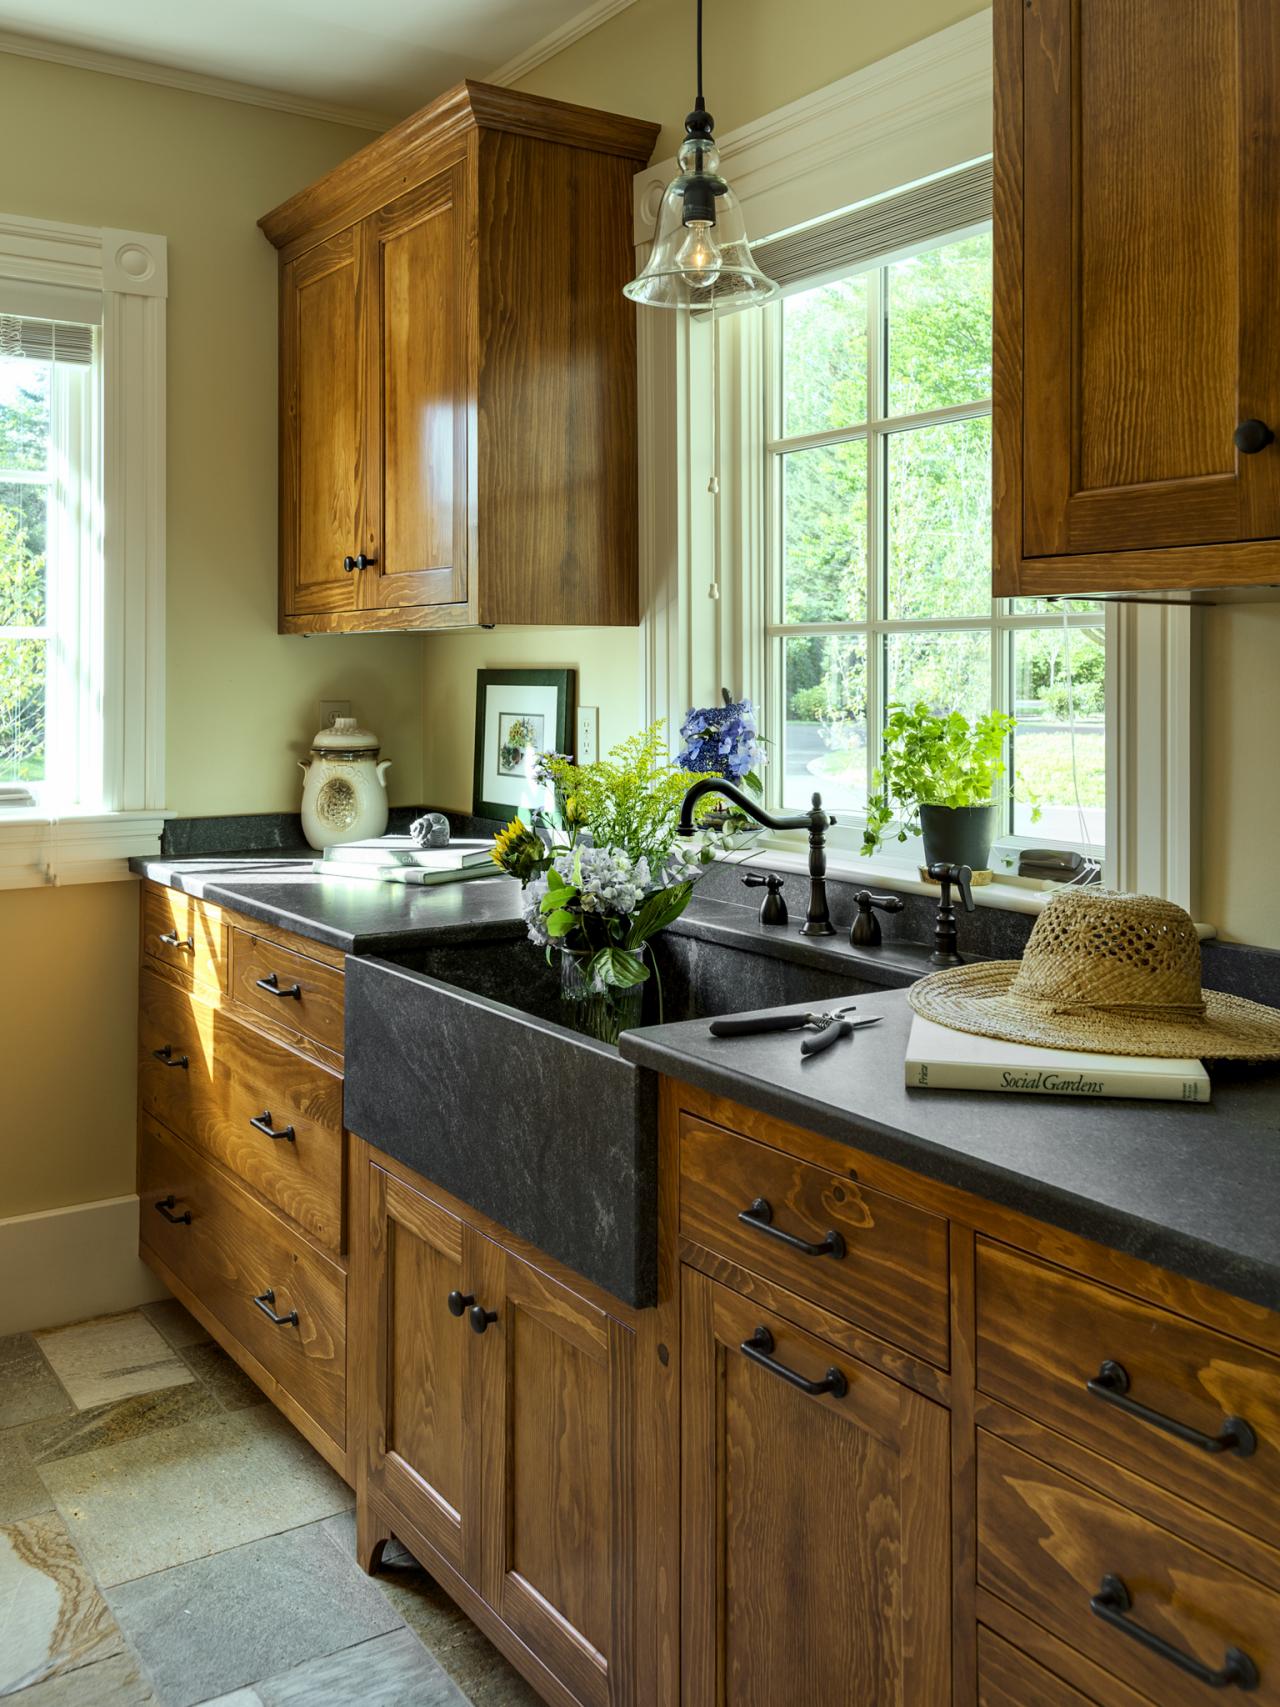 Pine Kitchen Cabinets: Pictures, Ideas & Tips From HGTV | HGTV